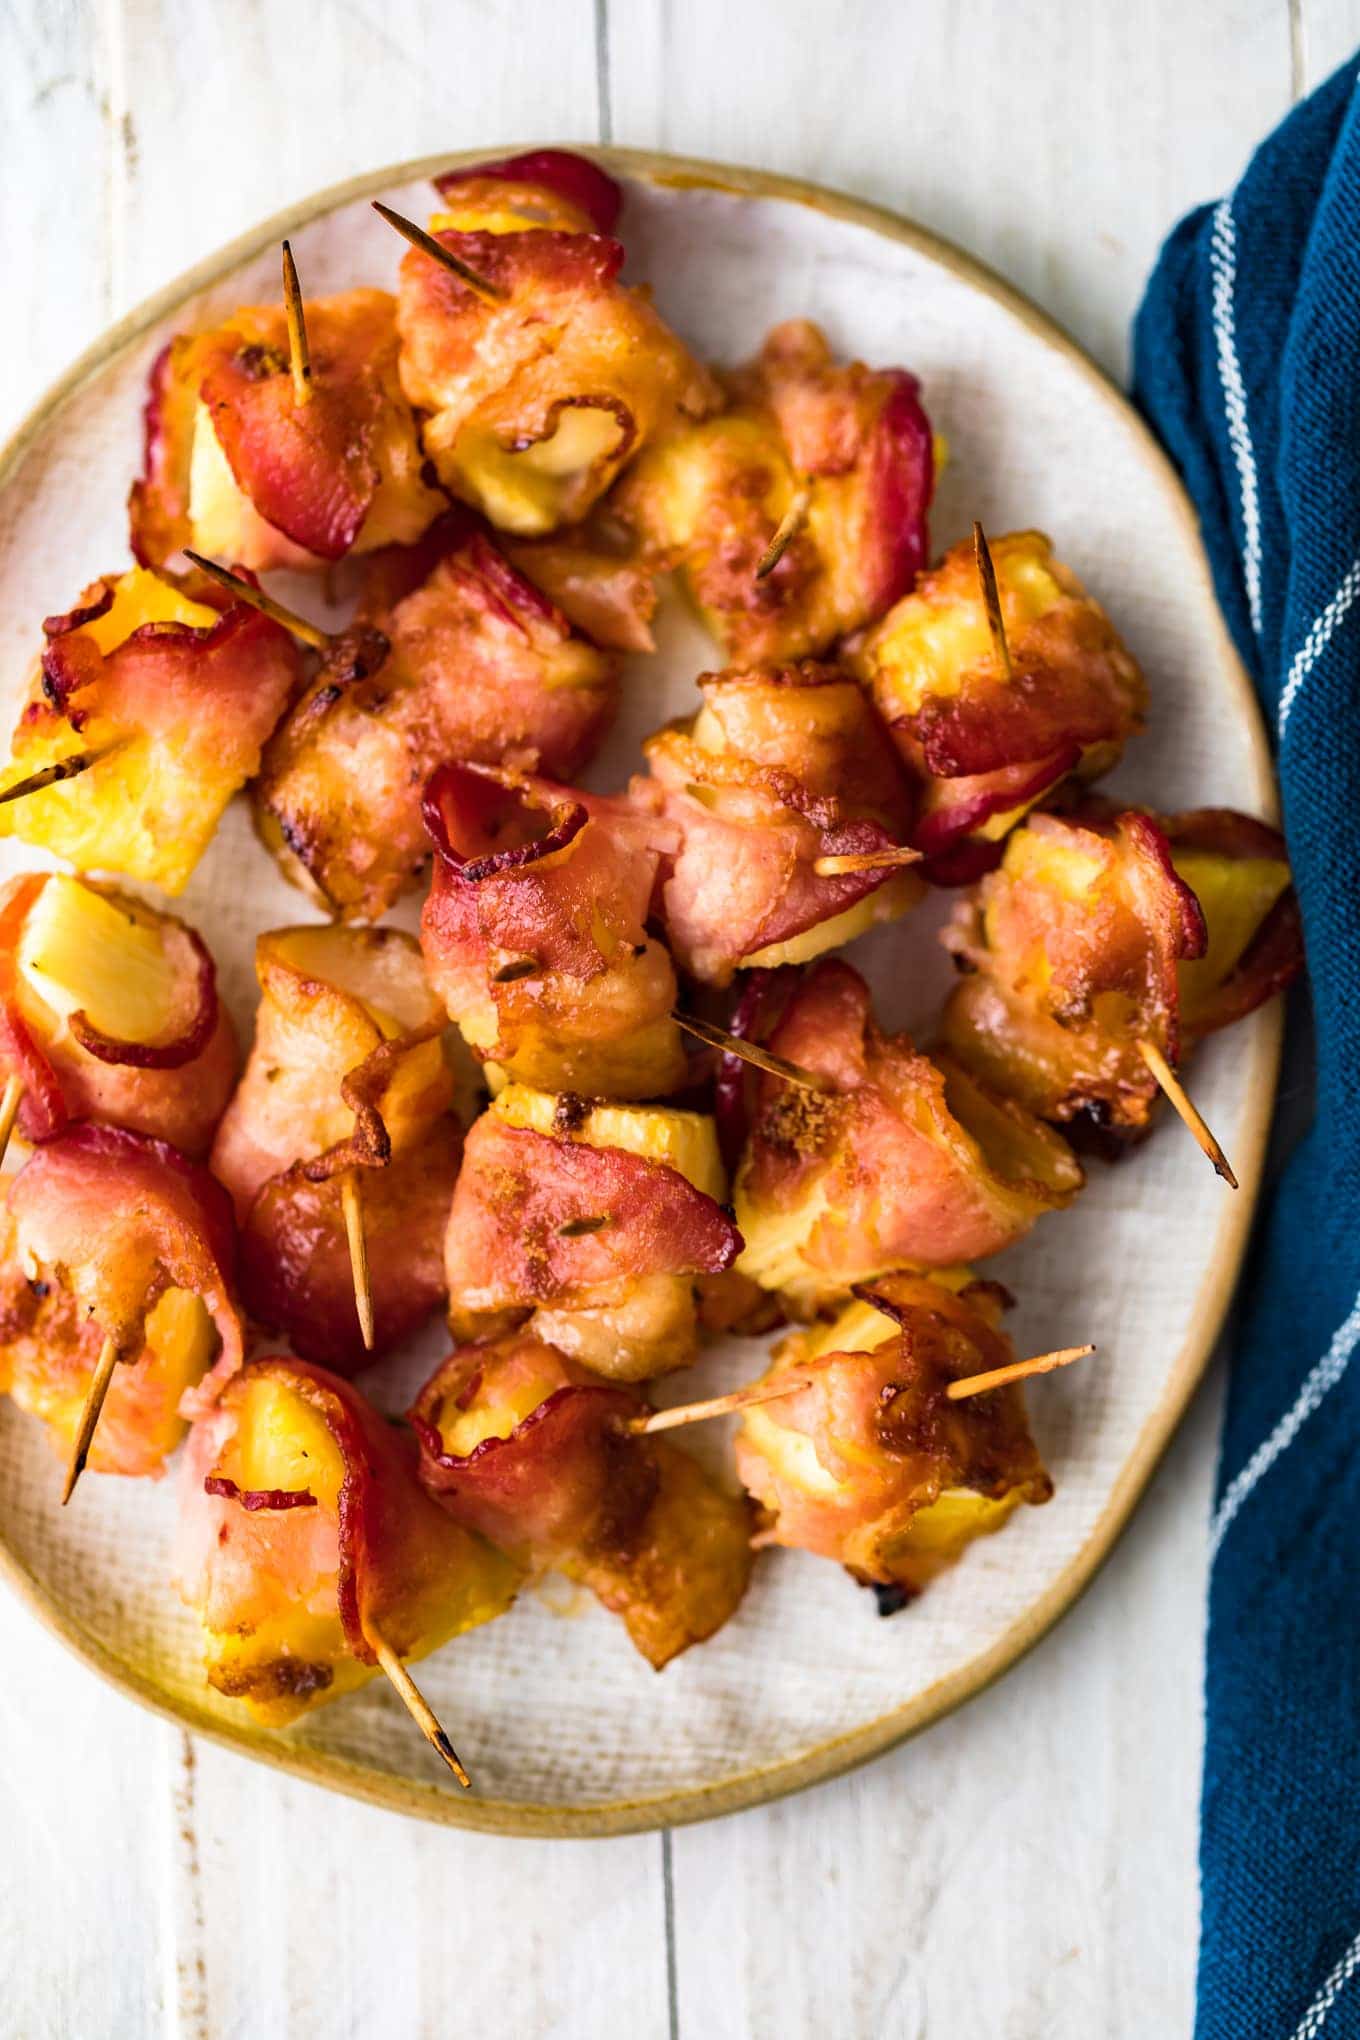 Top down shot of bacon wrapped pineapple on a serving plate